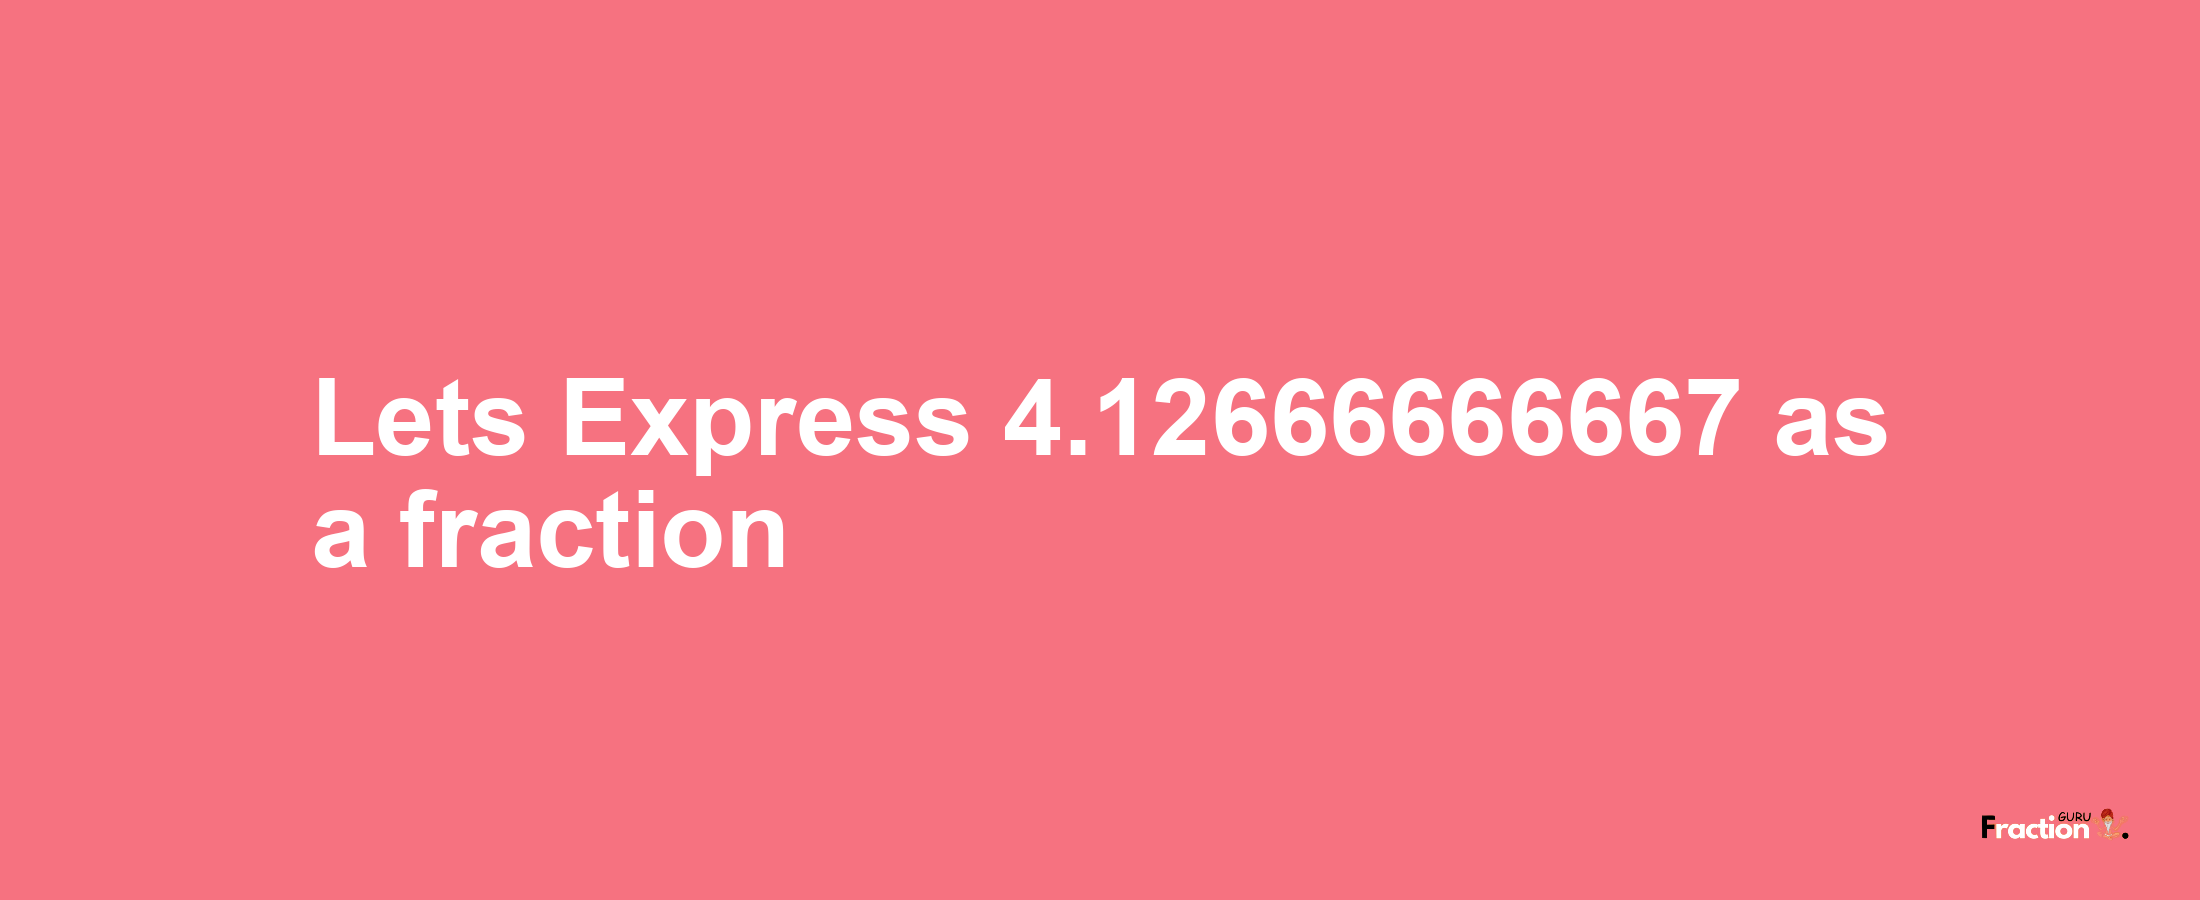 Lets Express 4.12666666667 as afraction